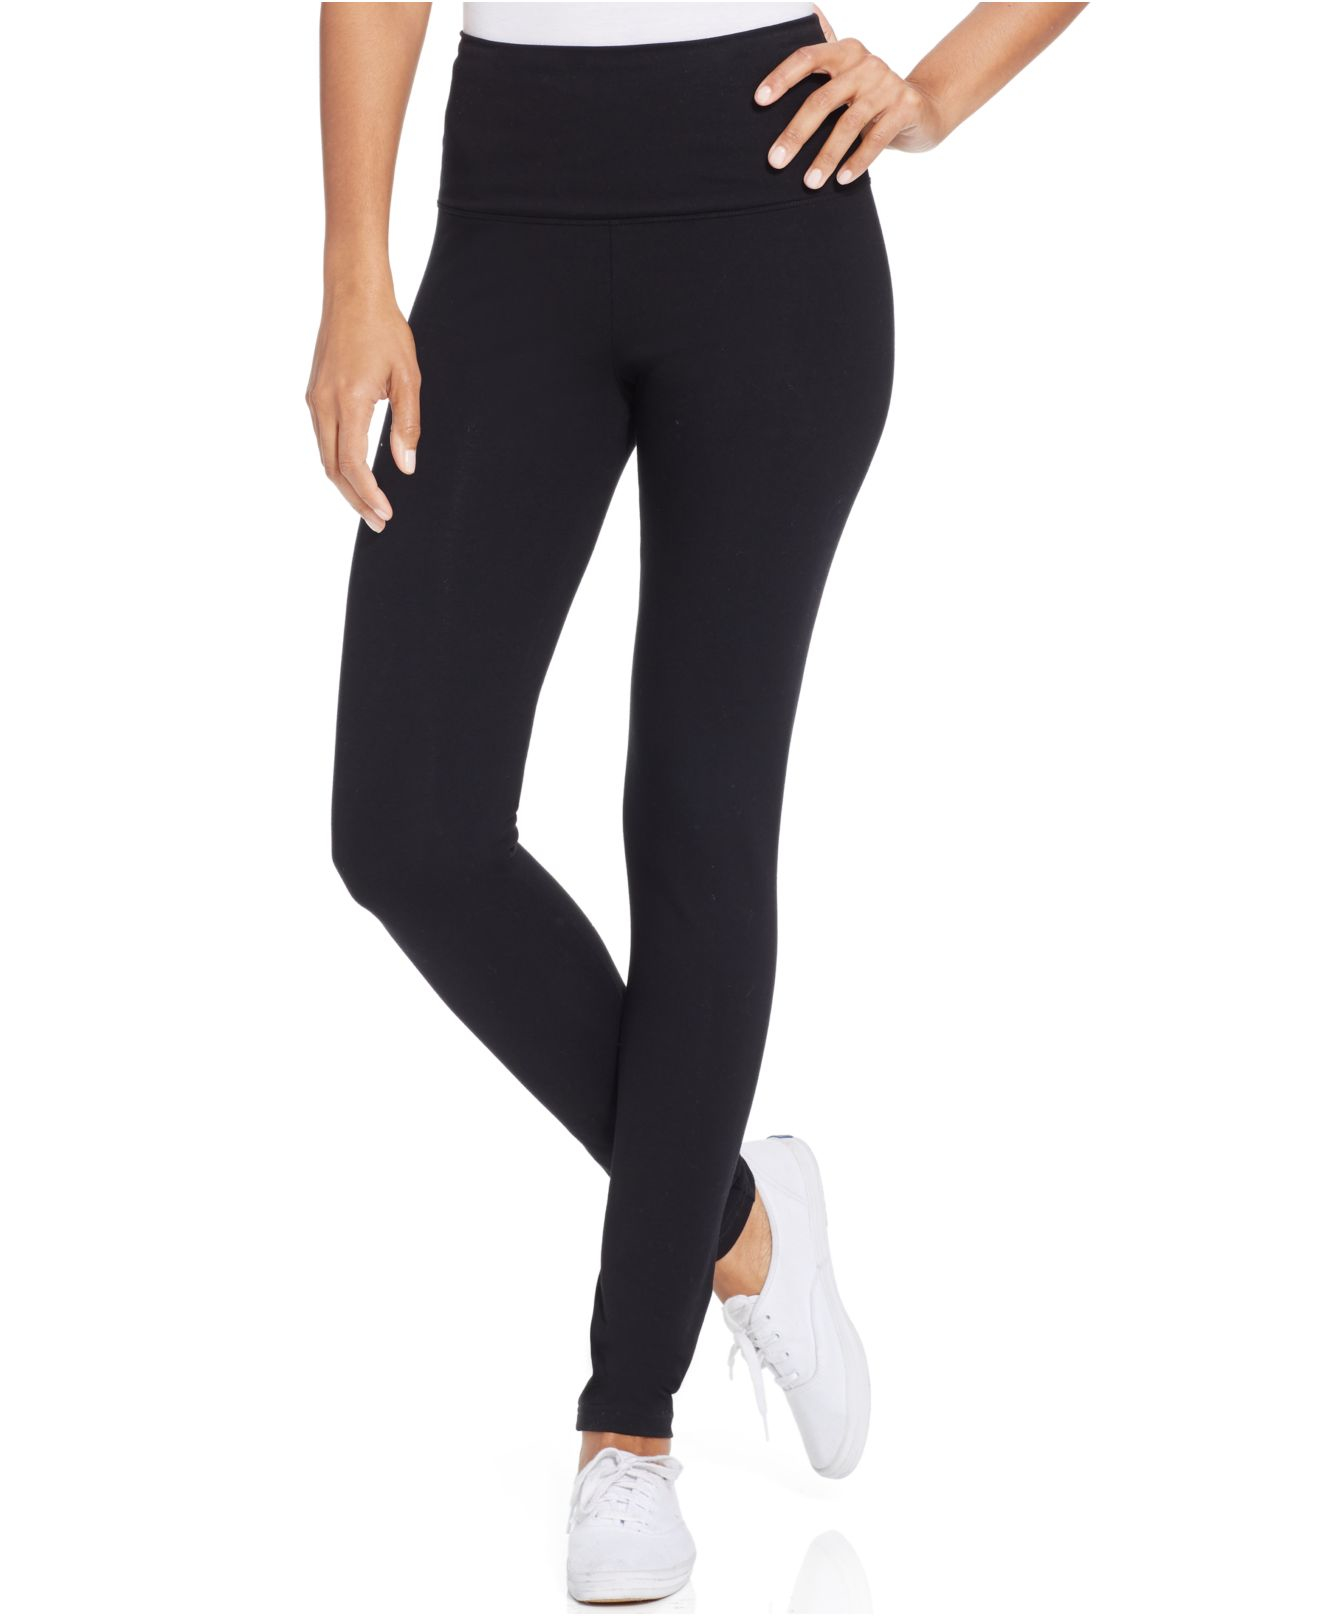 Style & co. Sport Plus Size Tummy-control Leggings, Only At Macy's in ...